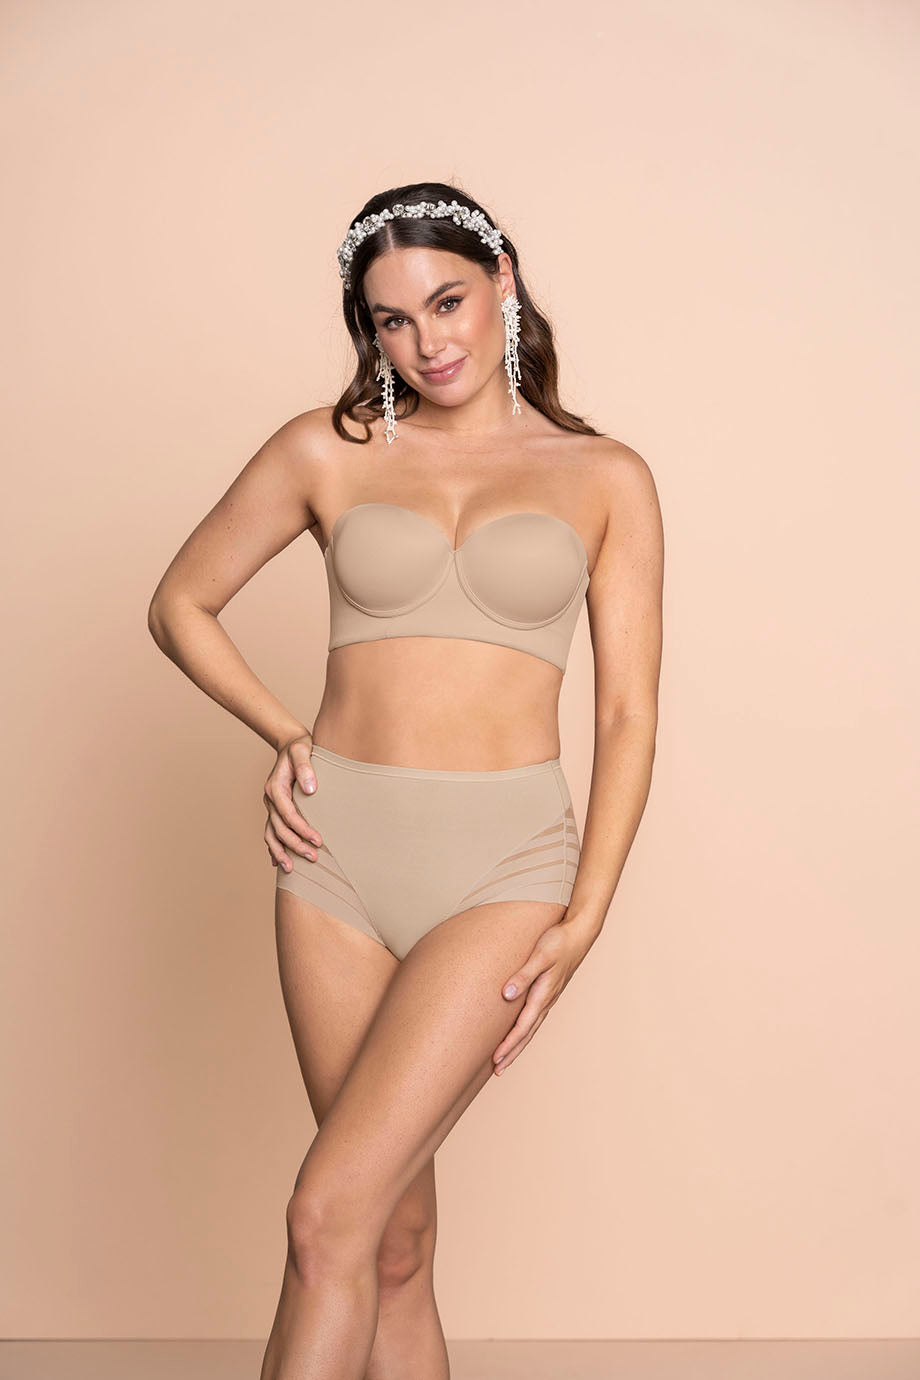 Which type of bra is good? - C C's Lingerie & Bridal Bras